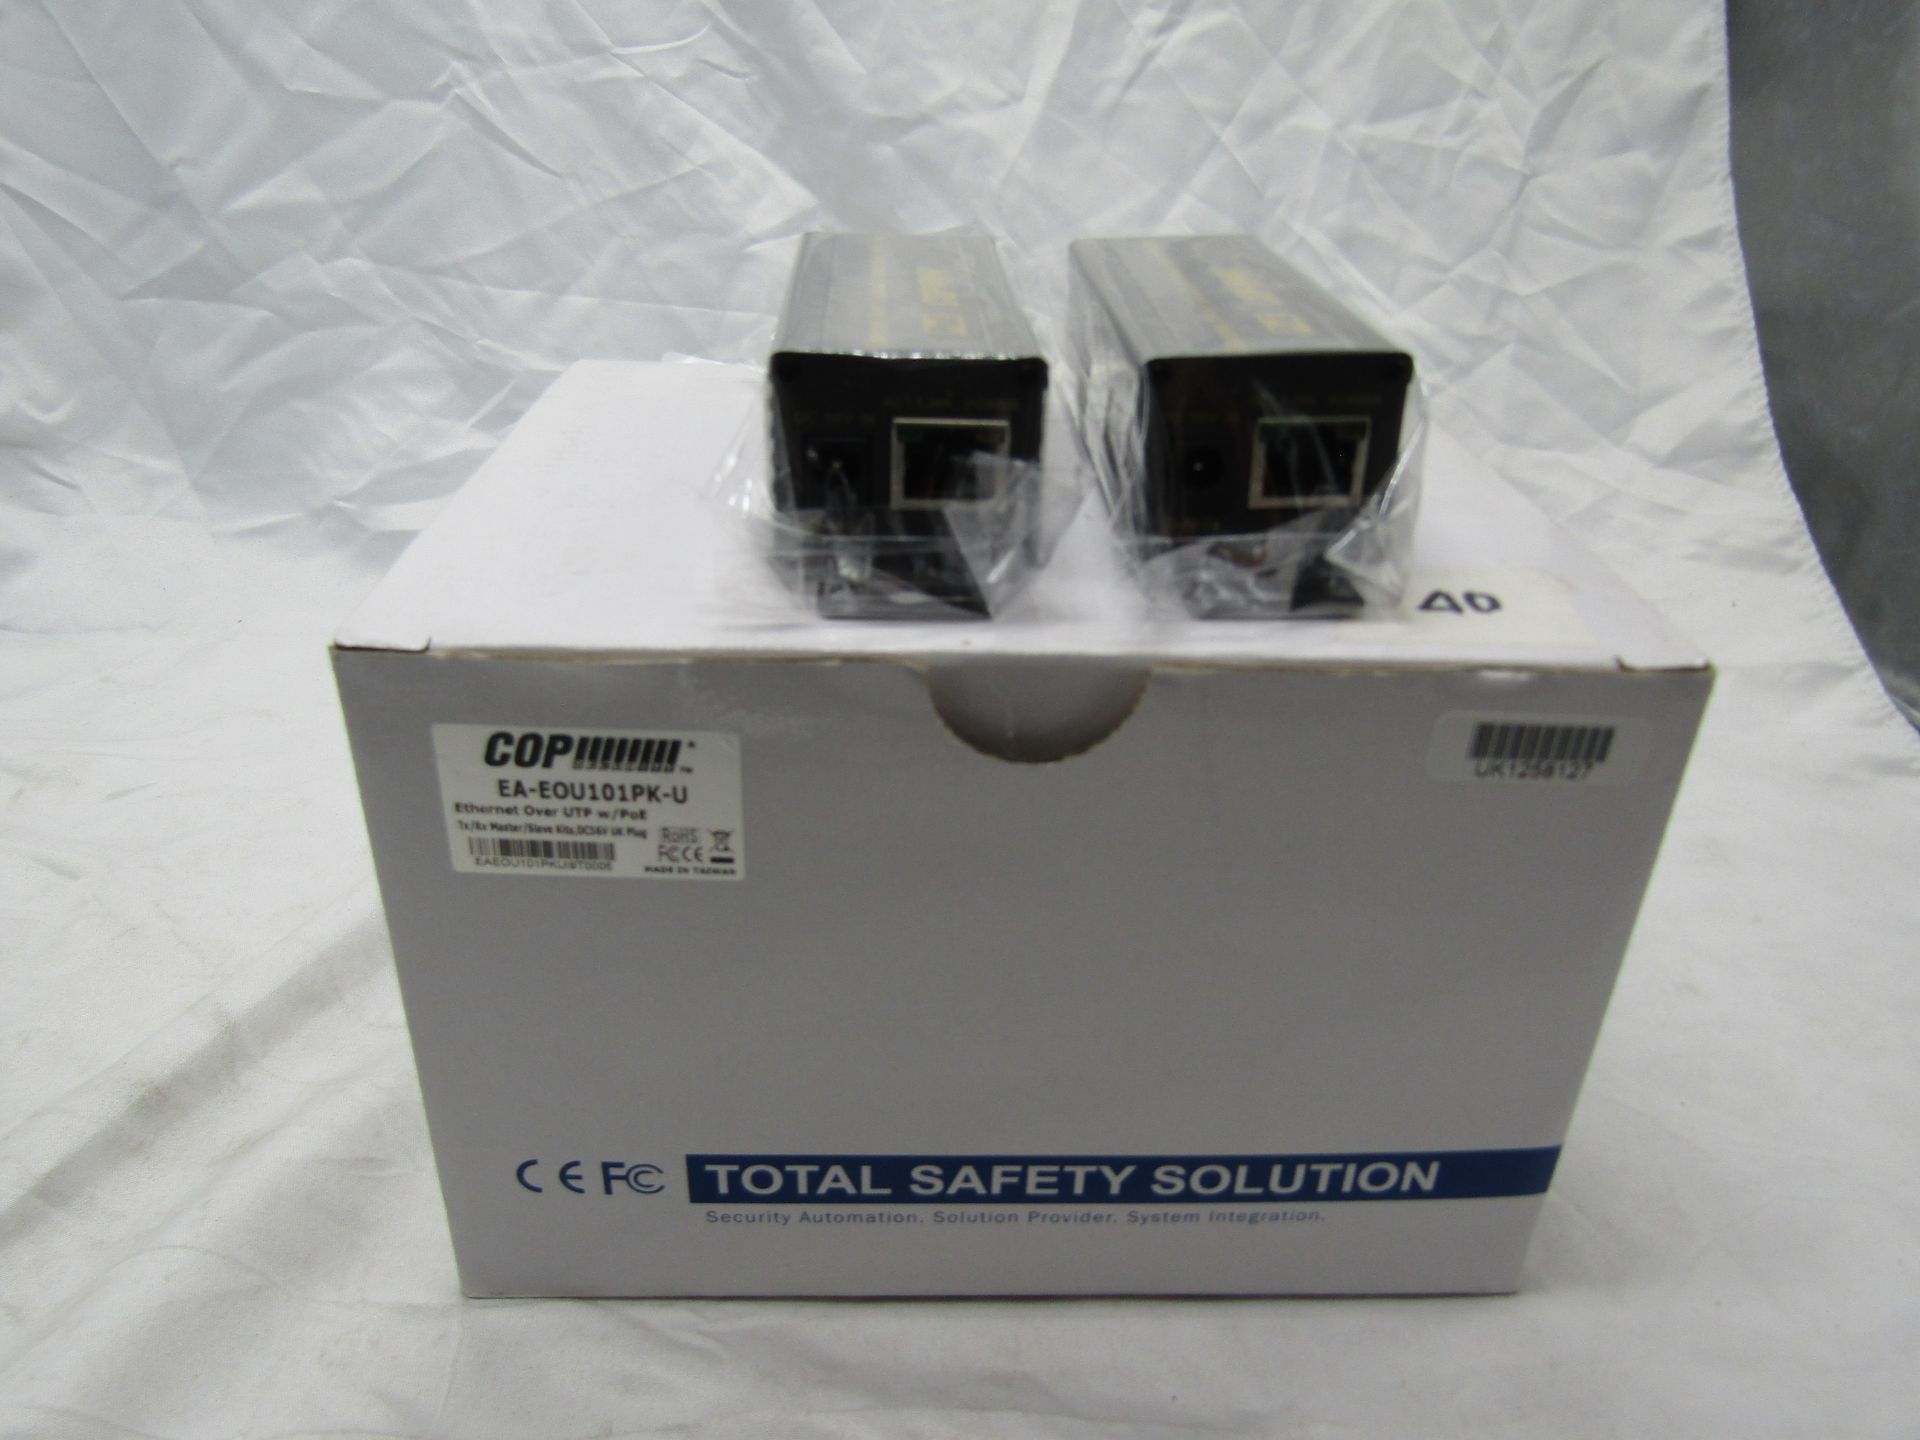 one lot of over 200 items of CCTV and Surveillance equipment, includes DVRs, Cameras, Thermal - Image 70 of 104